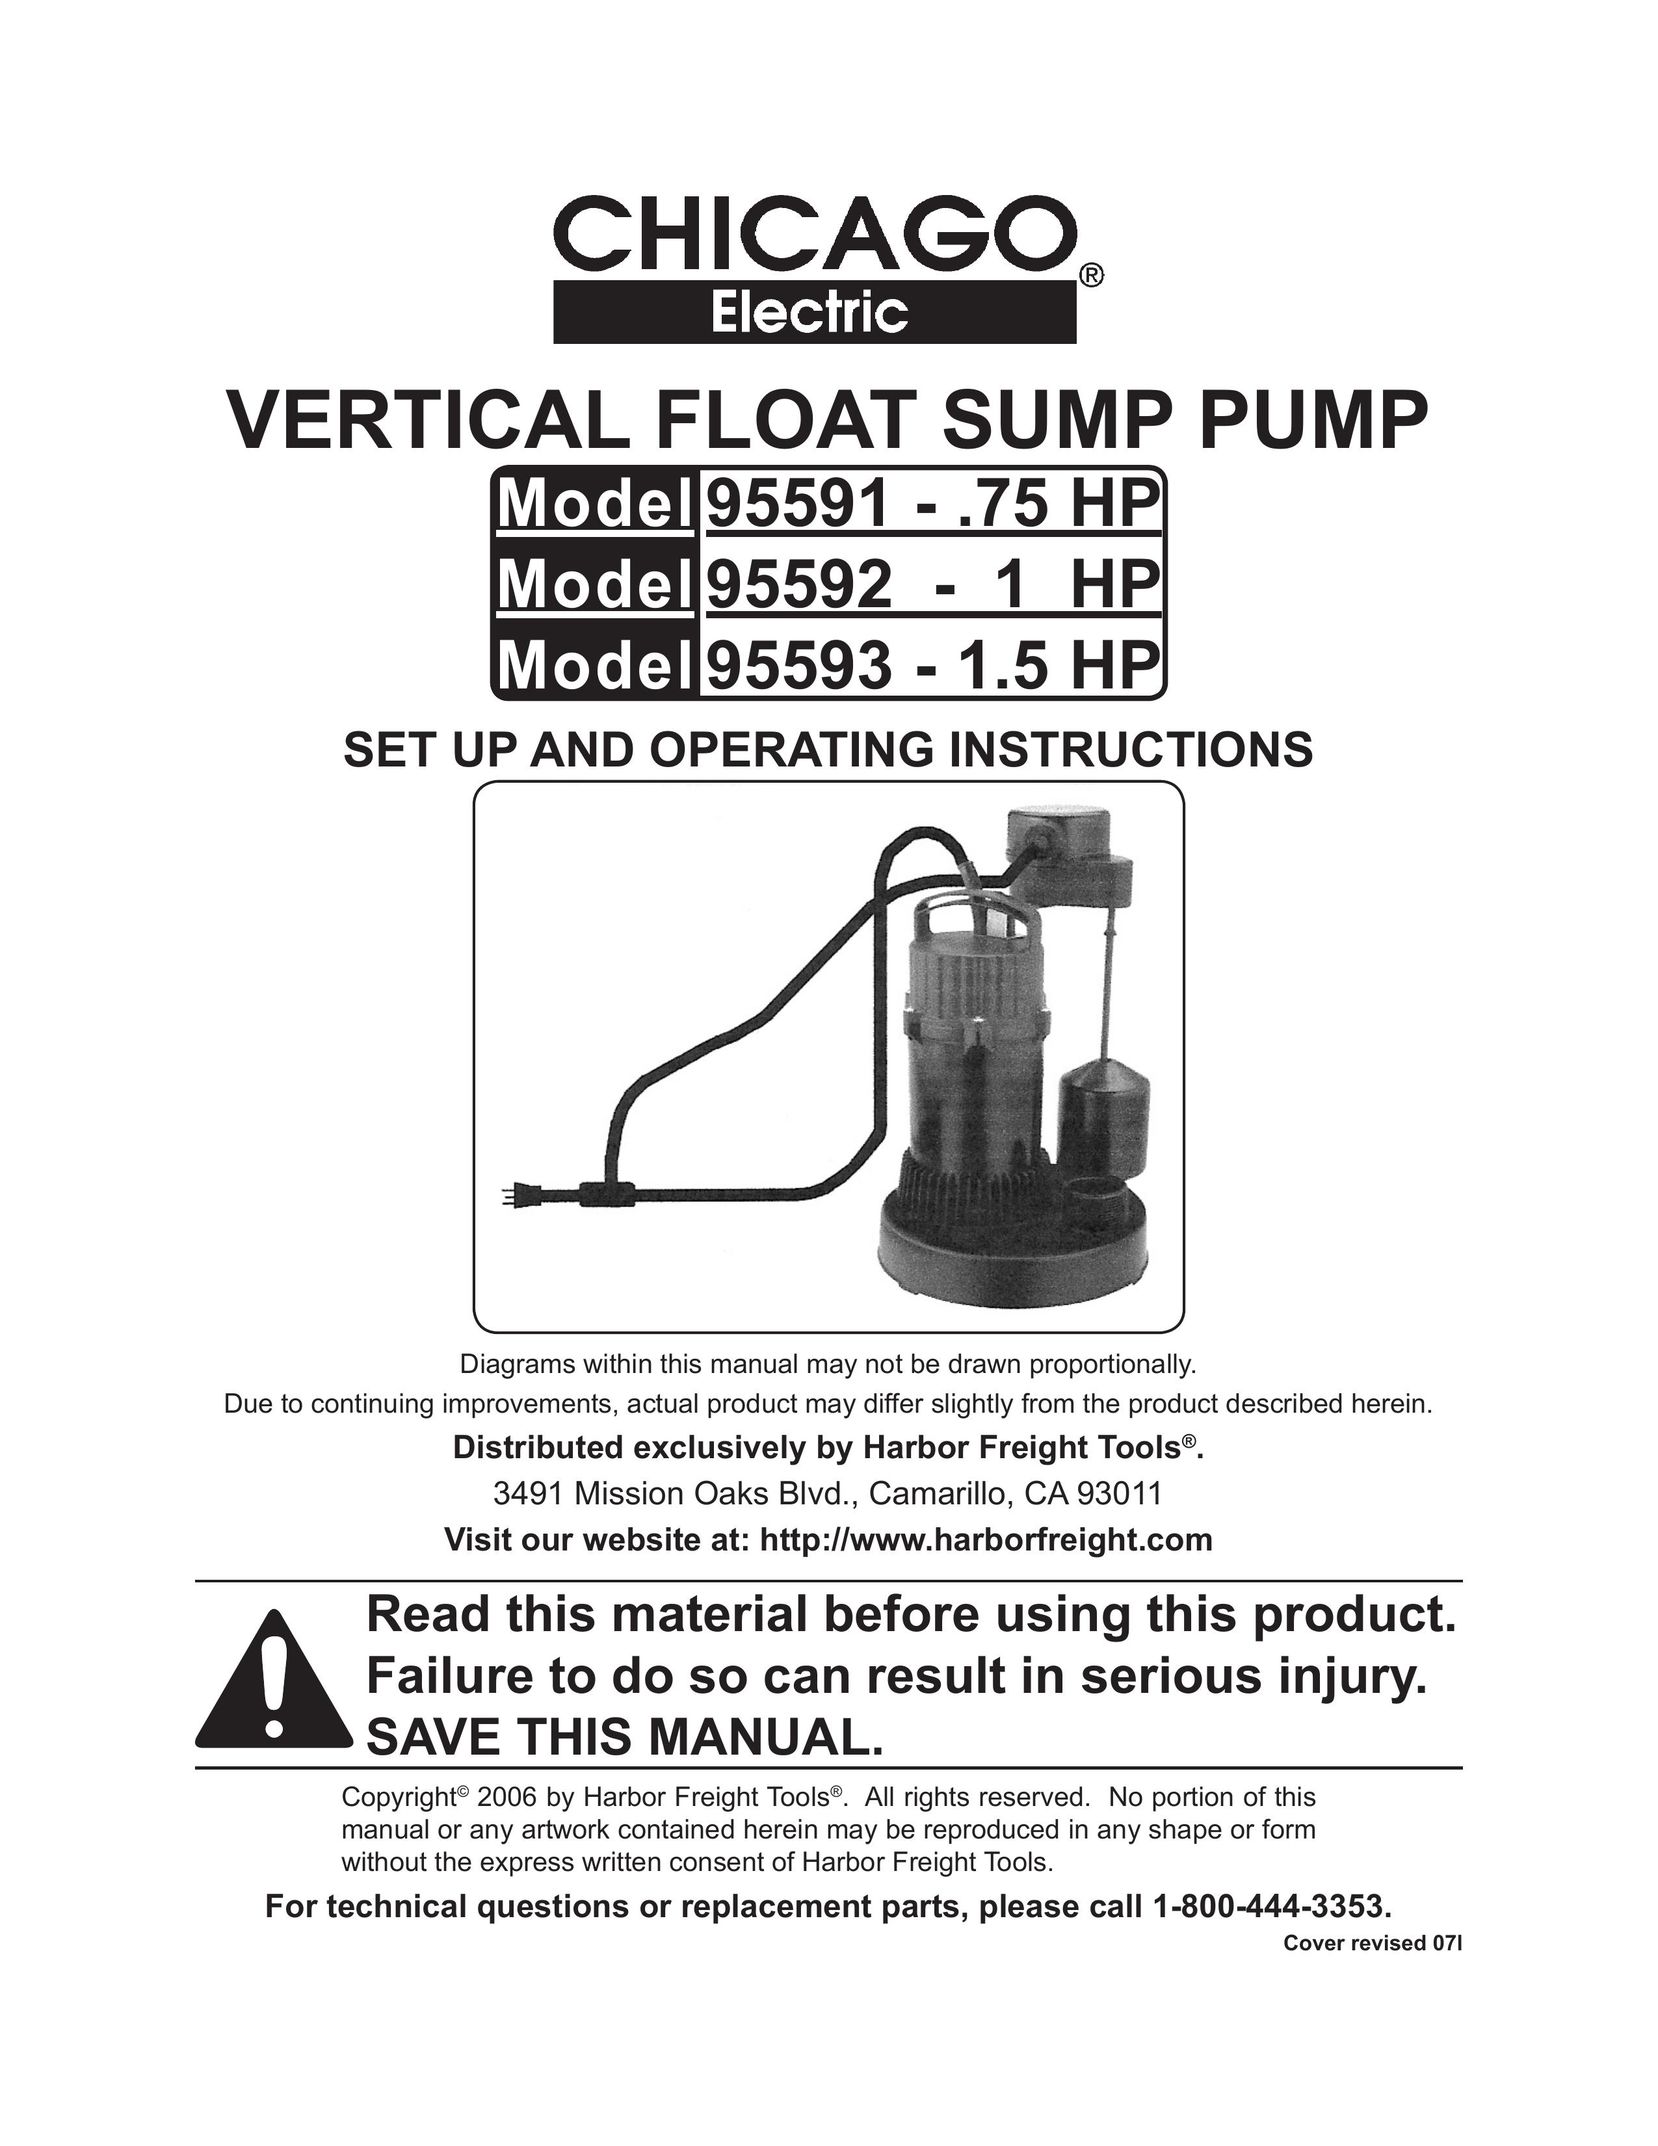 Chicago Electric 95591-.75 HP Water Pump User Manual